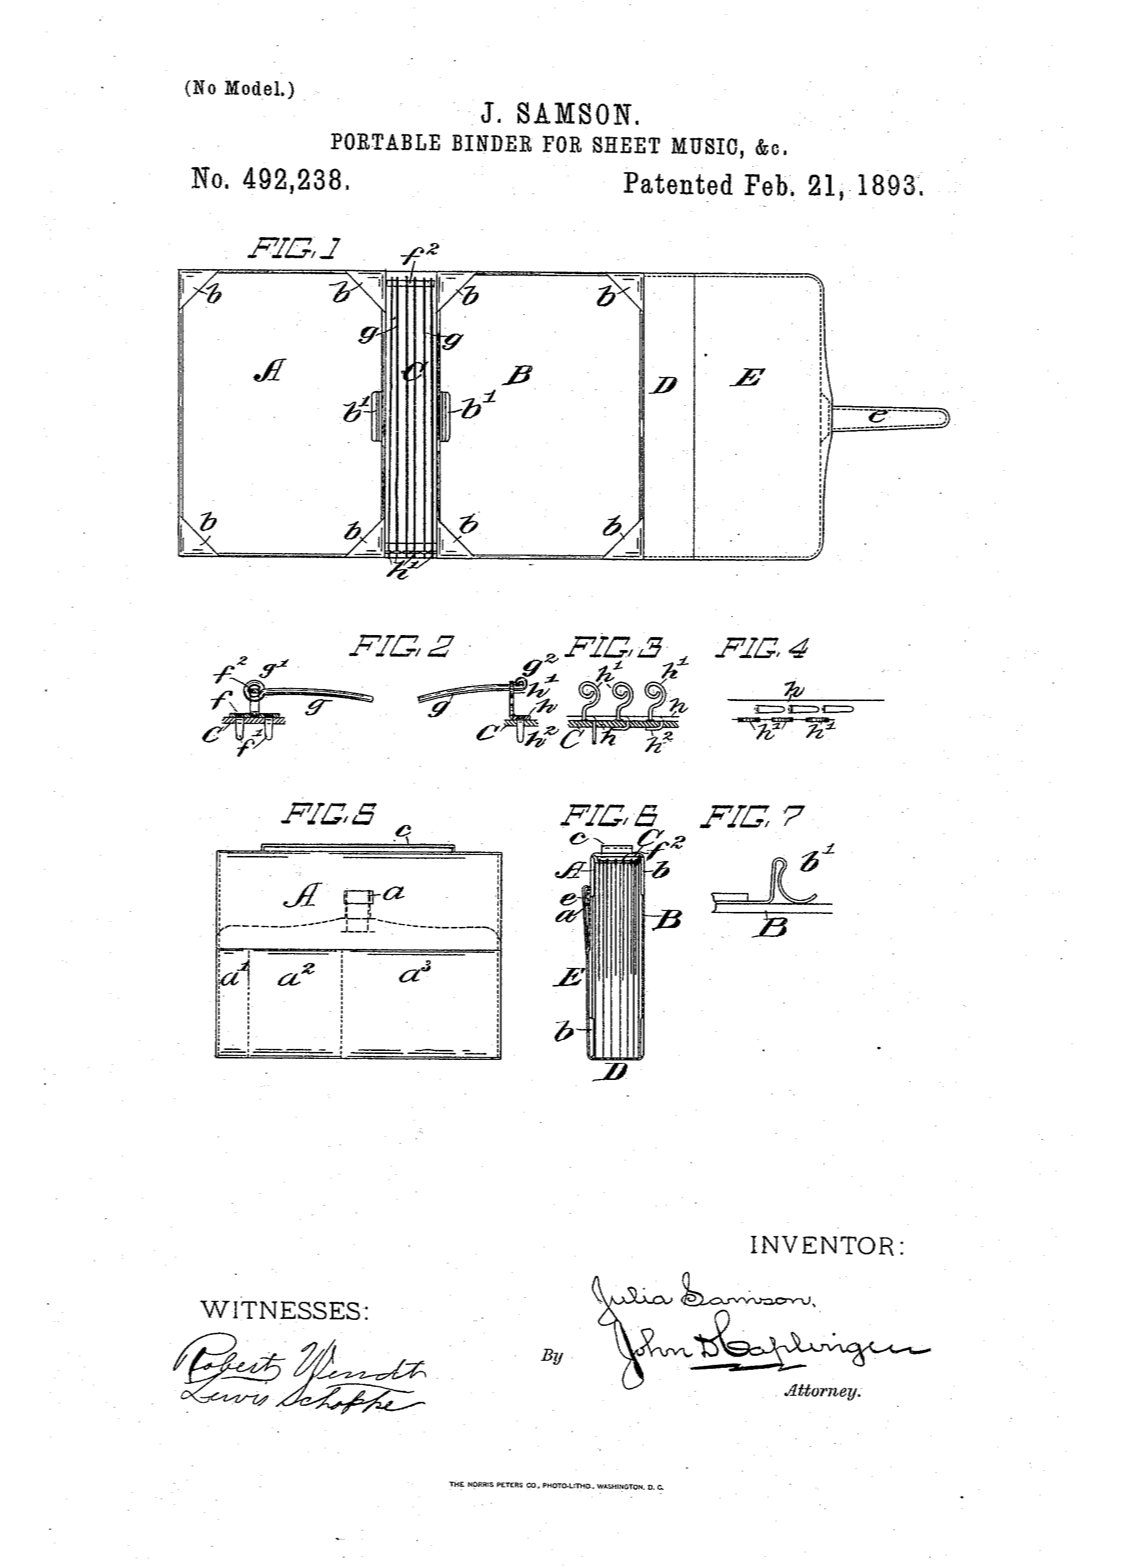 Drawing specifications of Julia F. Samson’s 1893 patented design for a portable binder for sheet music.